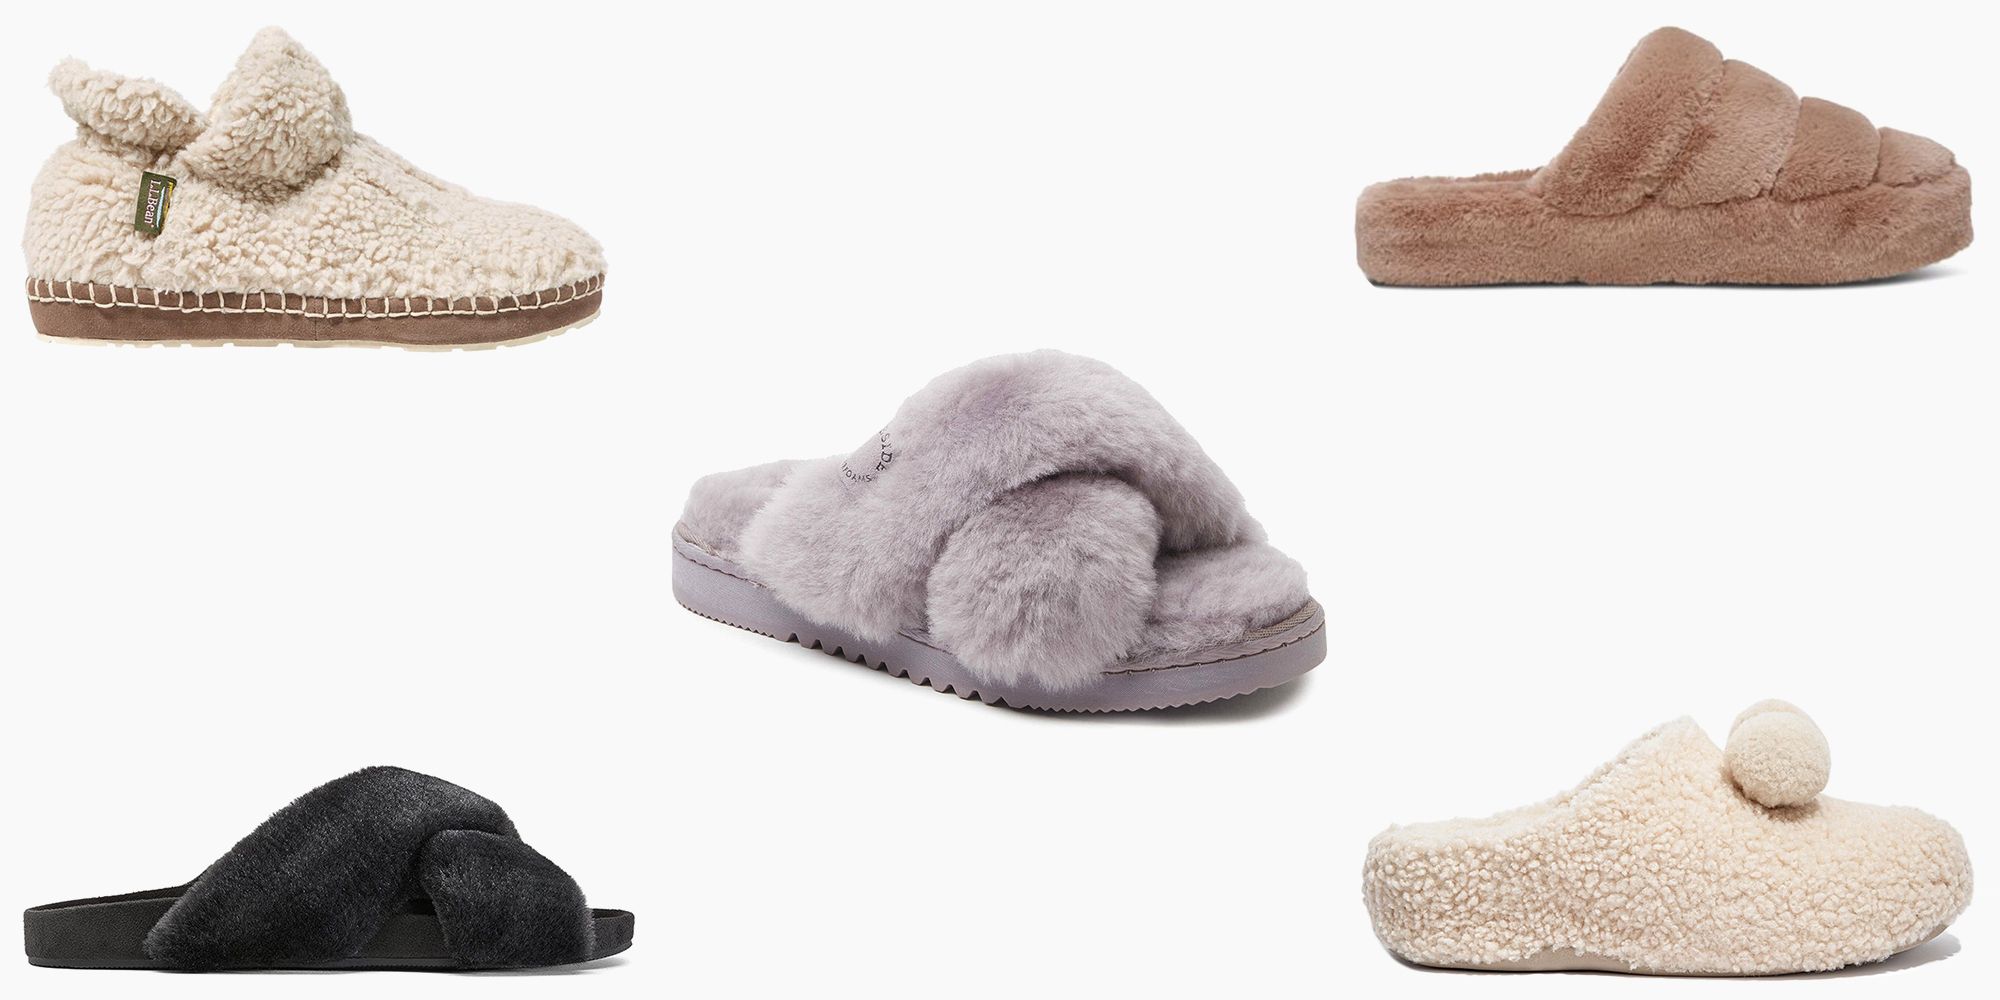 SMILE COZY SLIPPERS - LUXE wearhouse